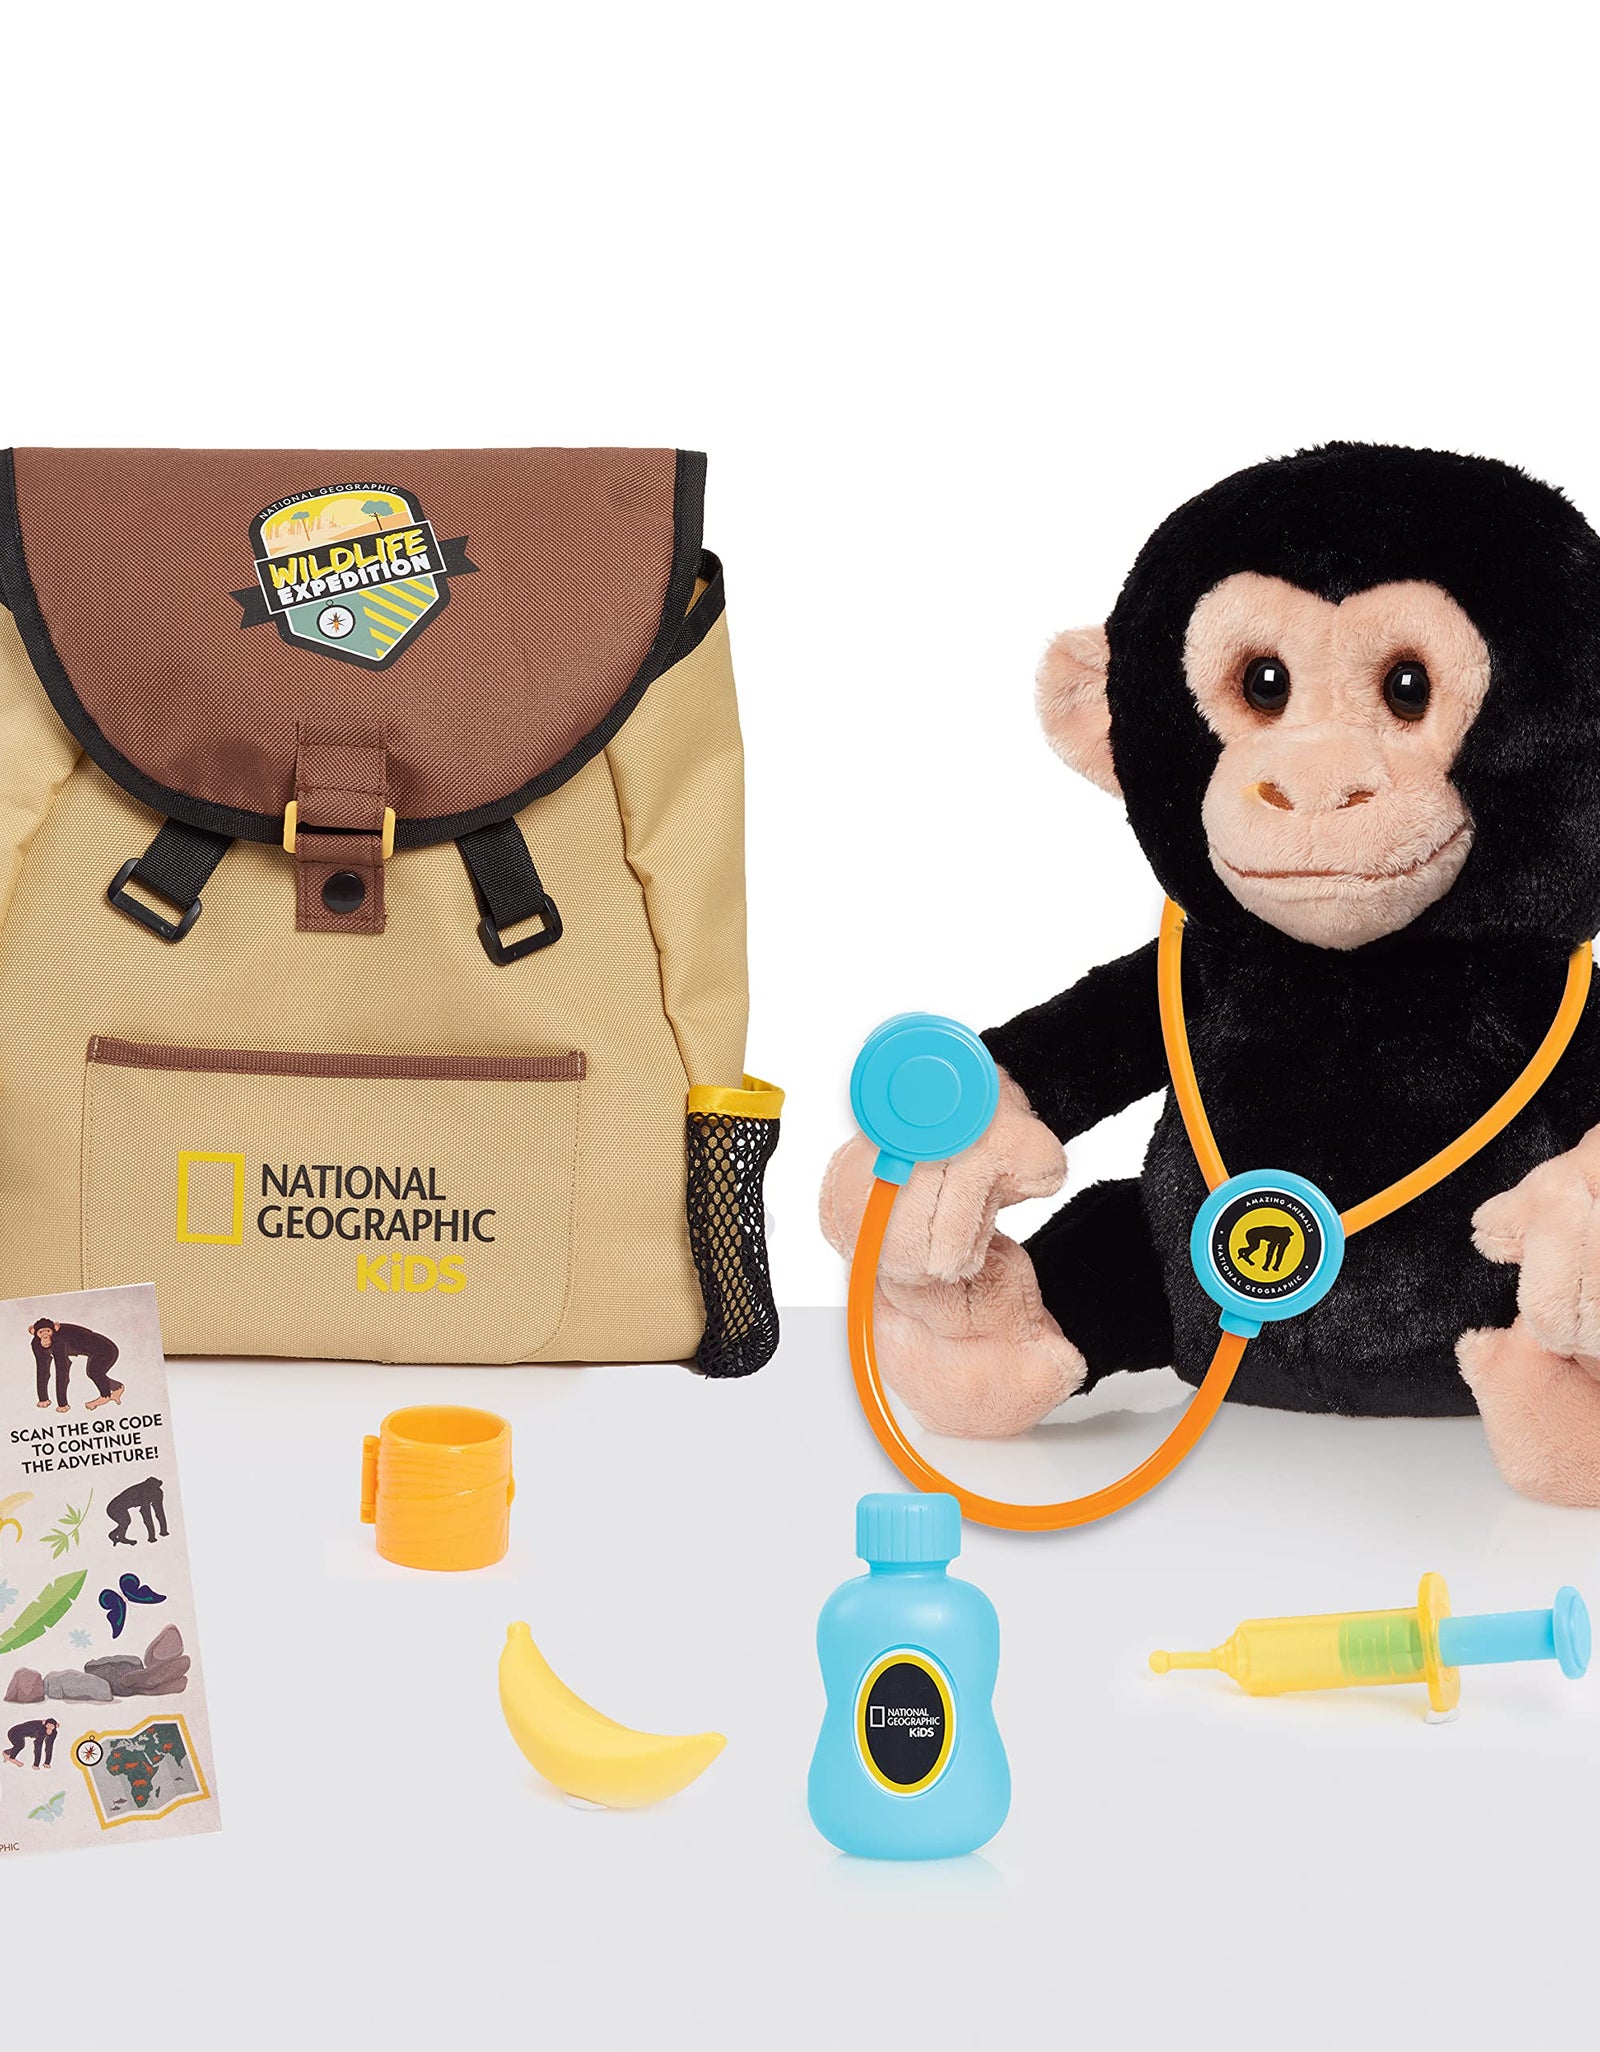 National Geographic Kids Chimpanzee Care & Nurture Vet Set, Interactive Stuffed Animal Toy, Sounds & Backpack, QR Code to Chimp Facts, Recycled Materials, Amazon Exclusive, by Just Play